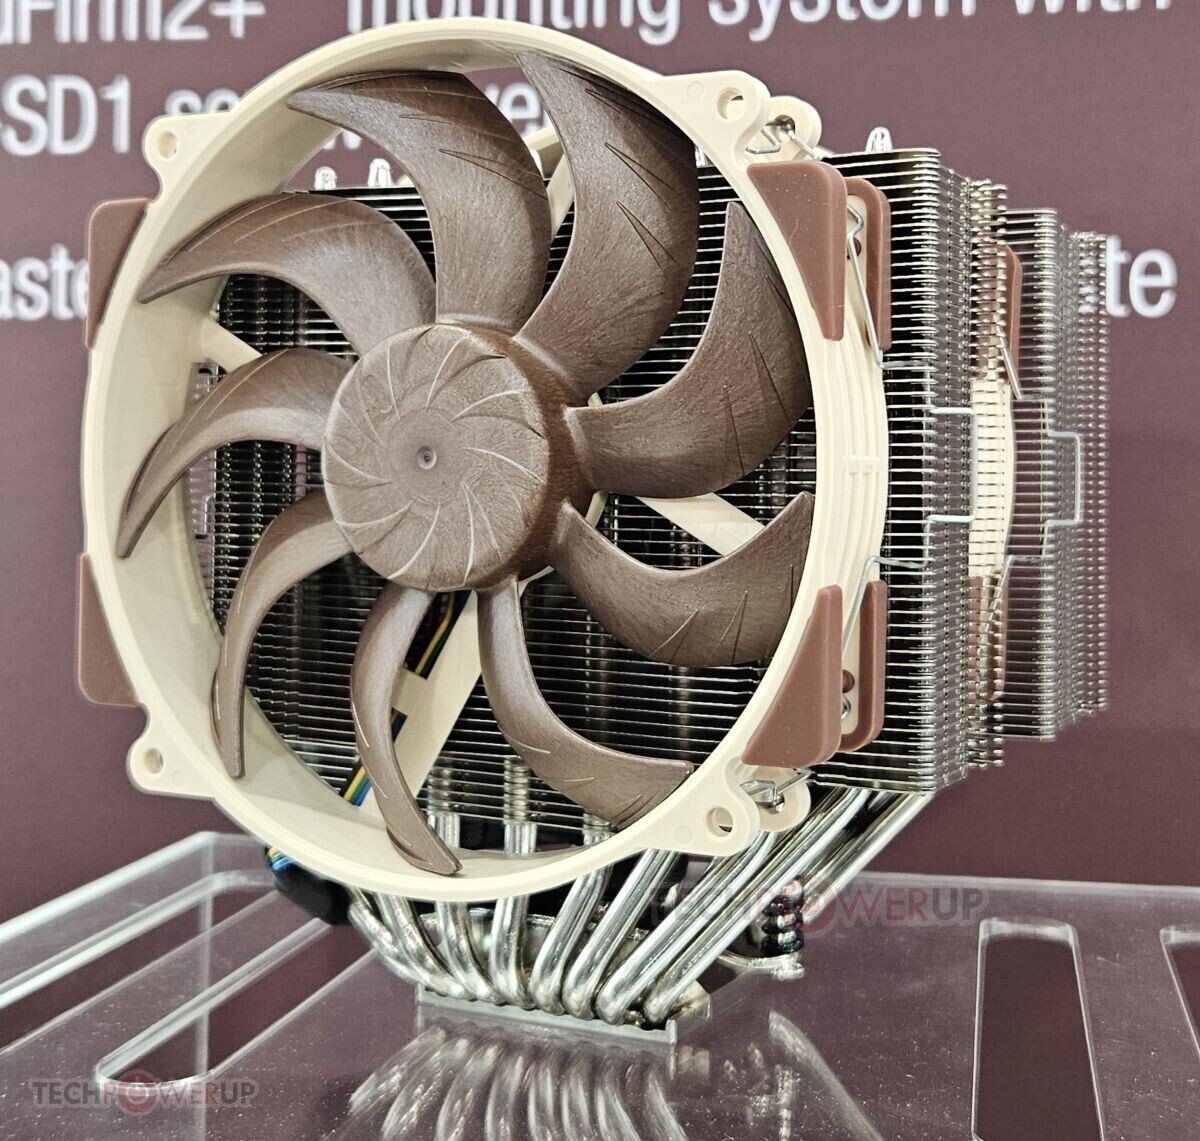 2nd Gen Noctua NH-D15 Takes the Fight to AIO CLCs